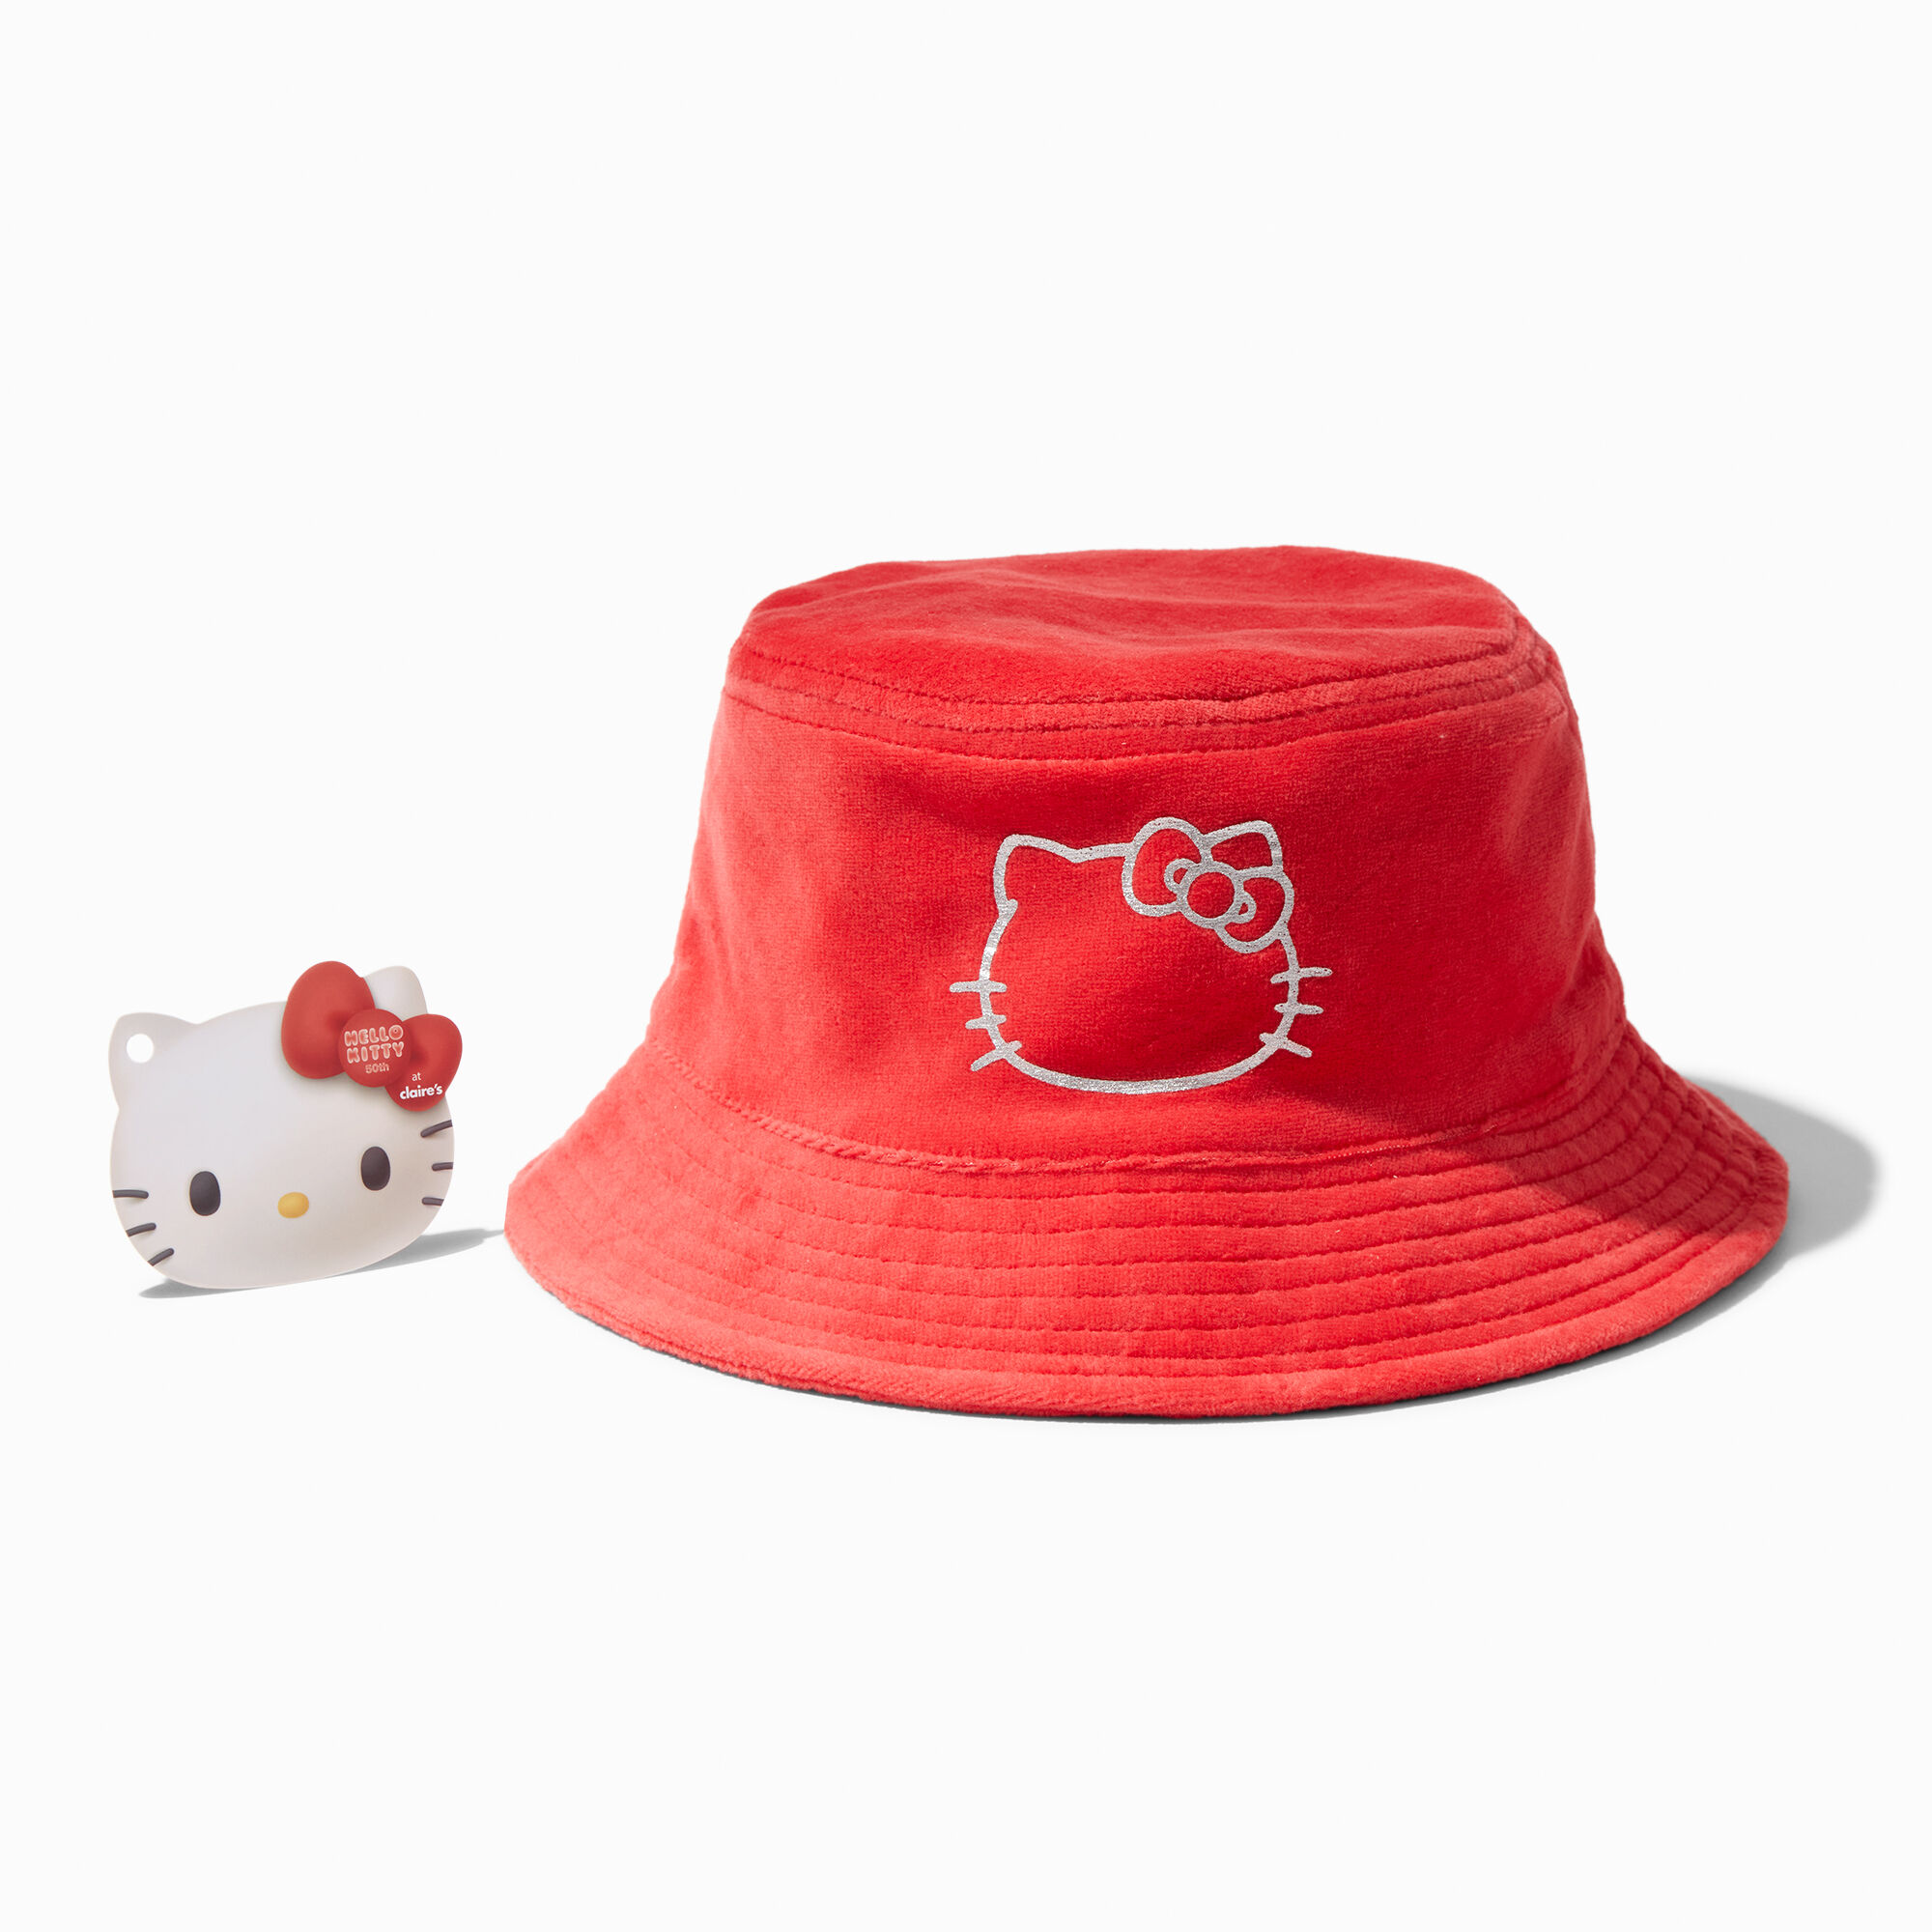 View Hello Kitty 50Th Anniversary Claires Exclusive Bucket Hat information